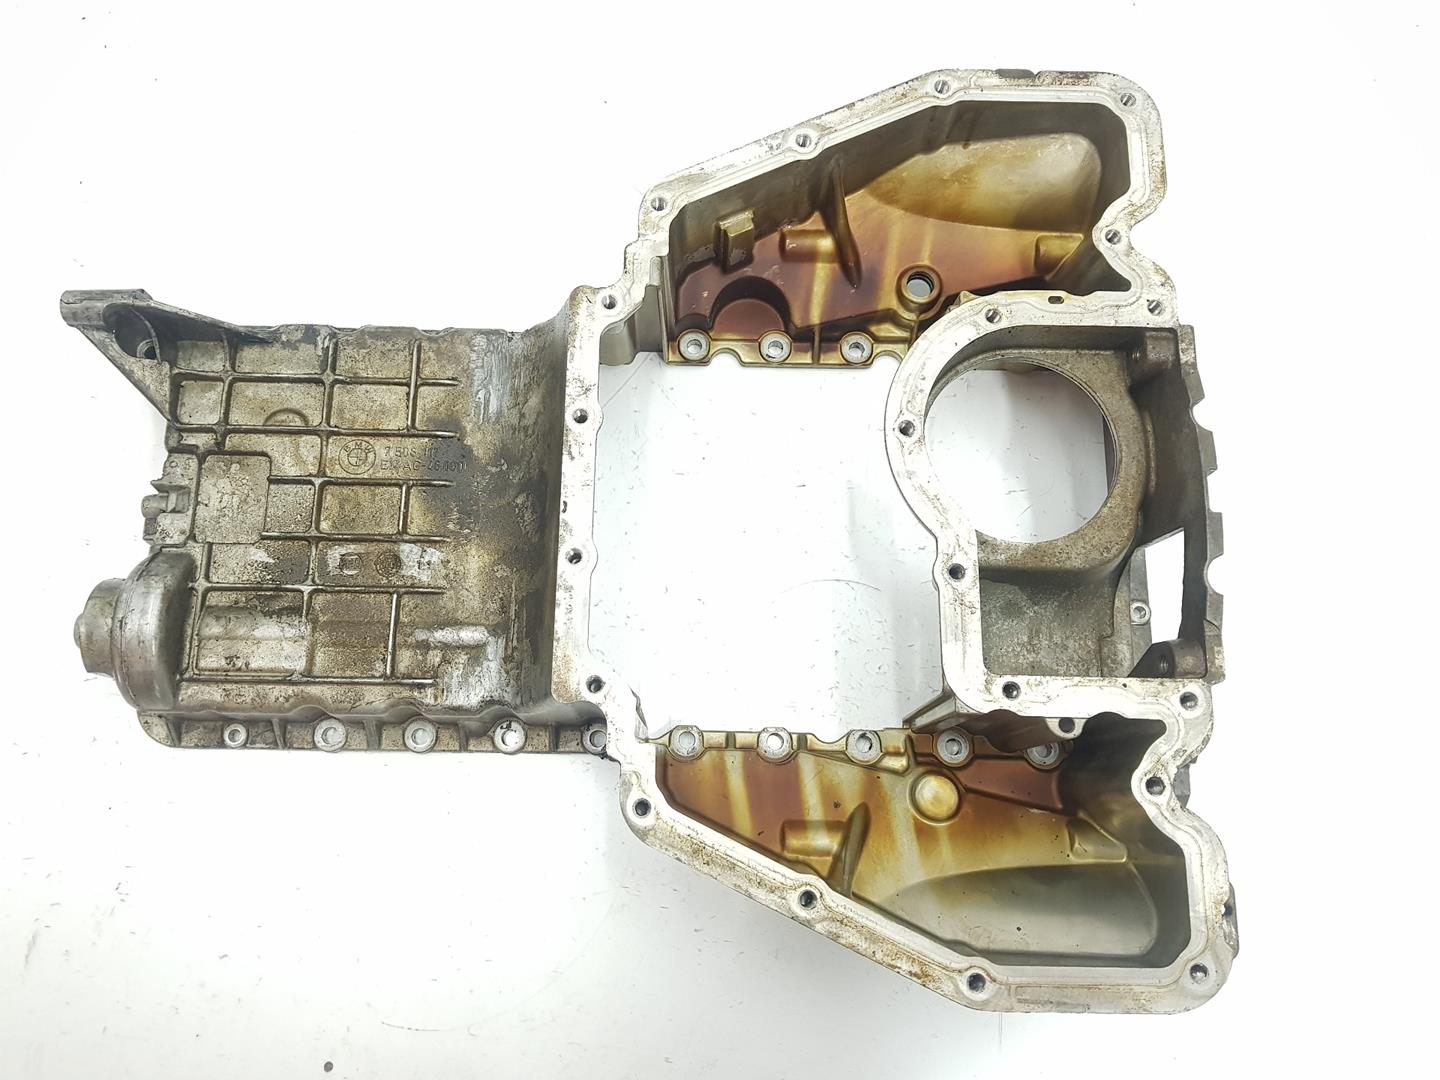 BMW 7 Series E65/E66 (2001-2008) Other Engine Compartment Parts 11137508118, 11137519491 20691218